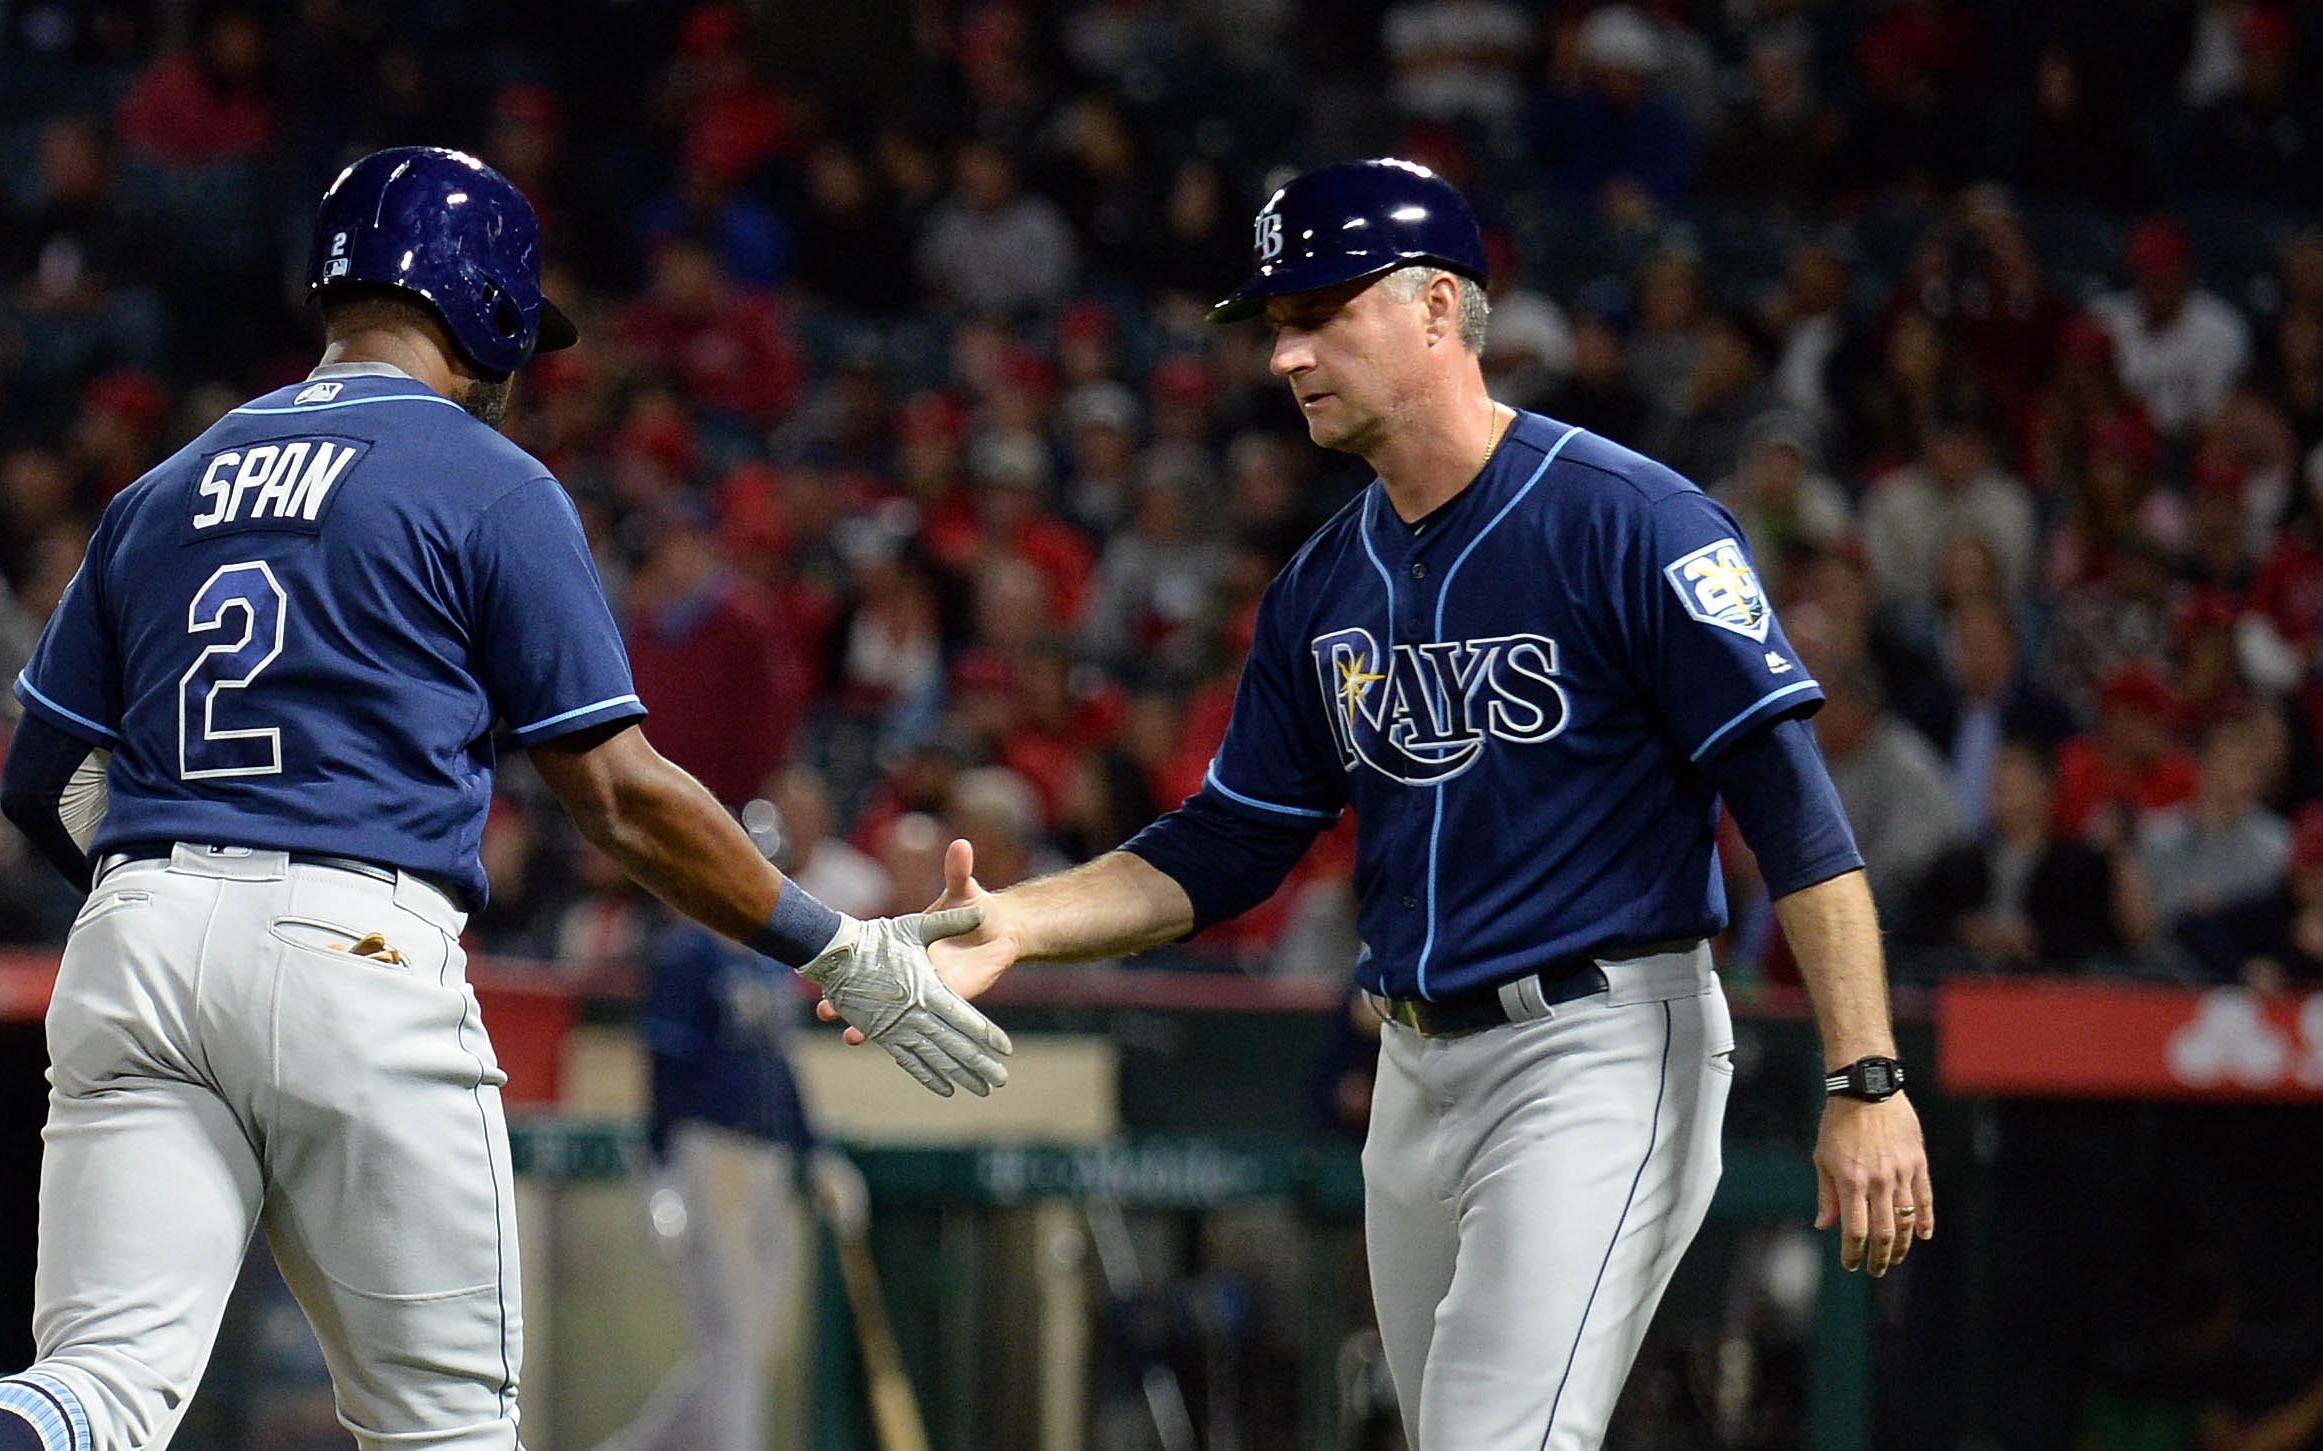 May 17, 2018; Anaheim, CA, USA; Tampa Bay Rays left fielder Denard Span (2) is greeted by third base coach Matt Quatraro (33) after hitting a two run home run in the seventh inning against the Los Angeles Angels at Angel Stadium of Anaheim. Mandatory Credit: Gary A. Vasquez-USA TODAY Sports / © Gary A. Vasquez-USA TODAY Sports